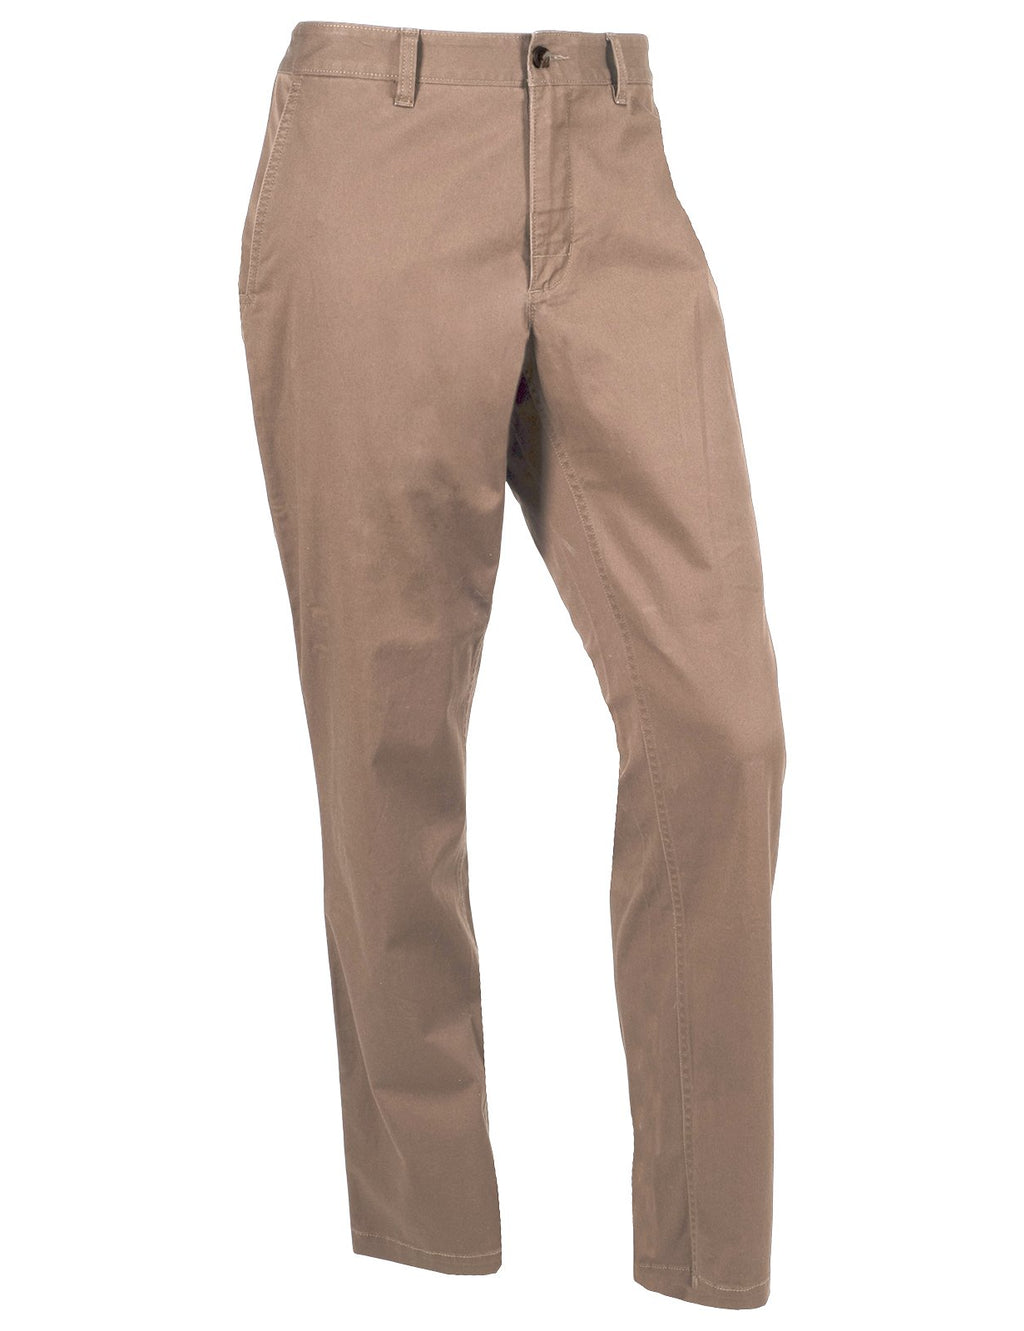 Homestead Chino Pant front view